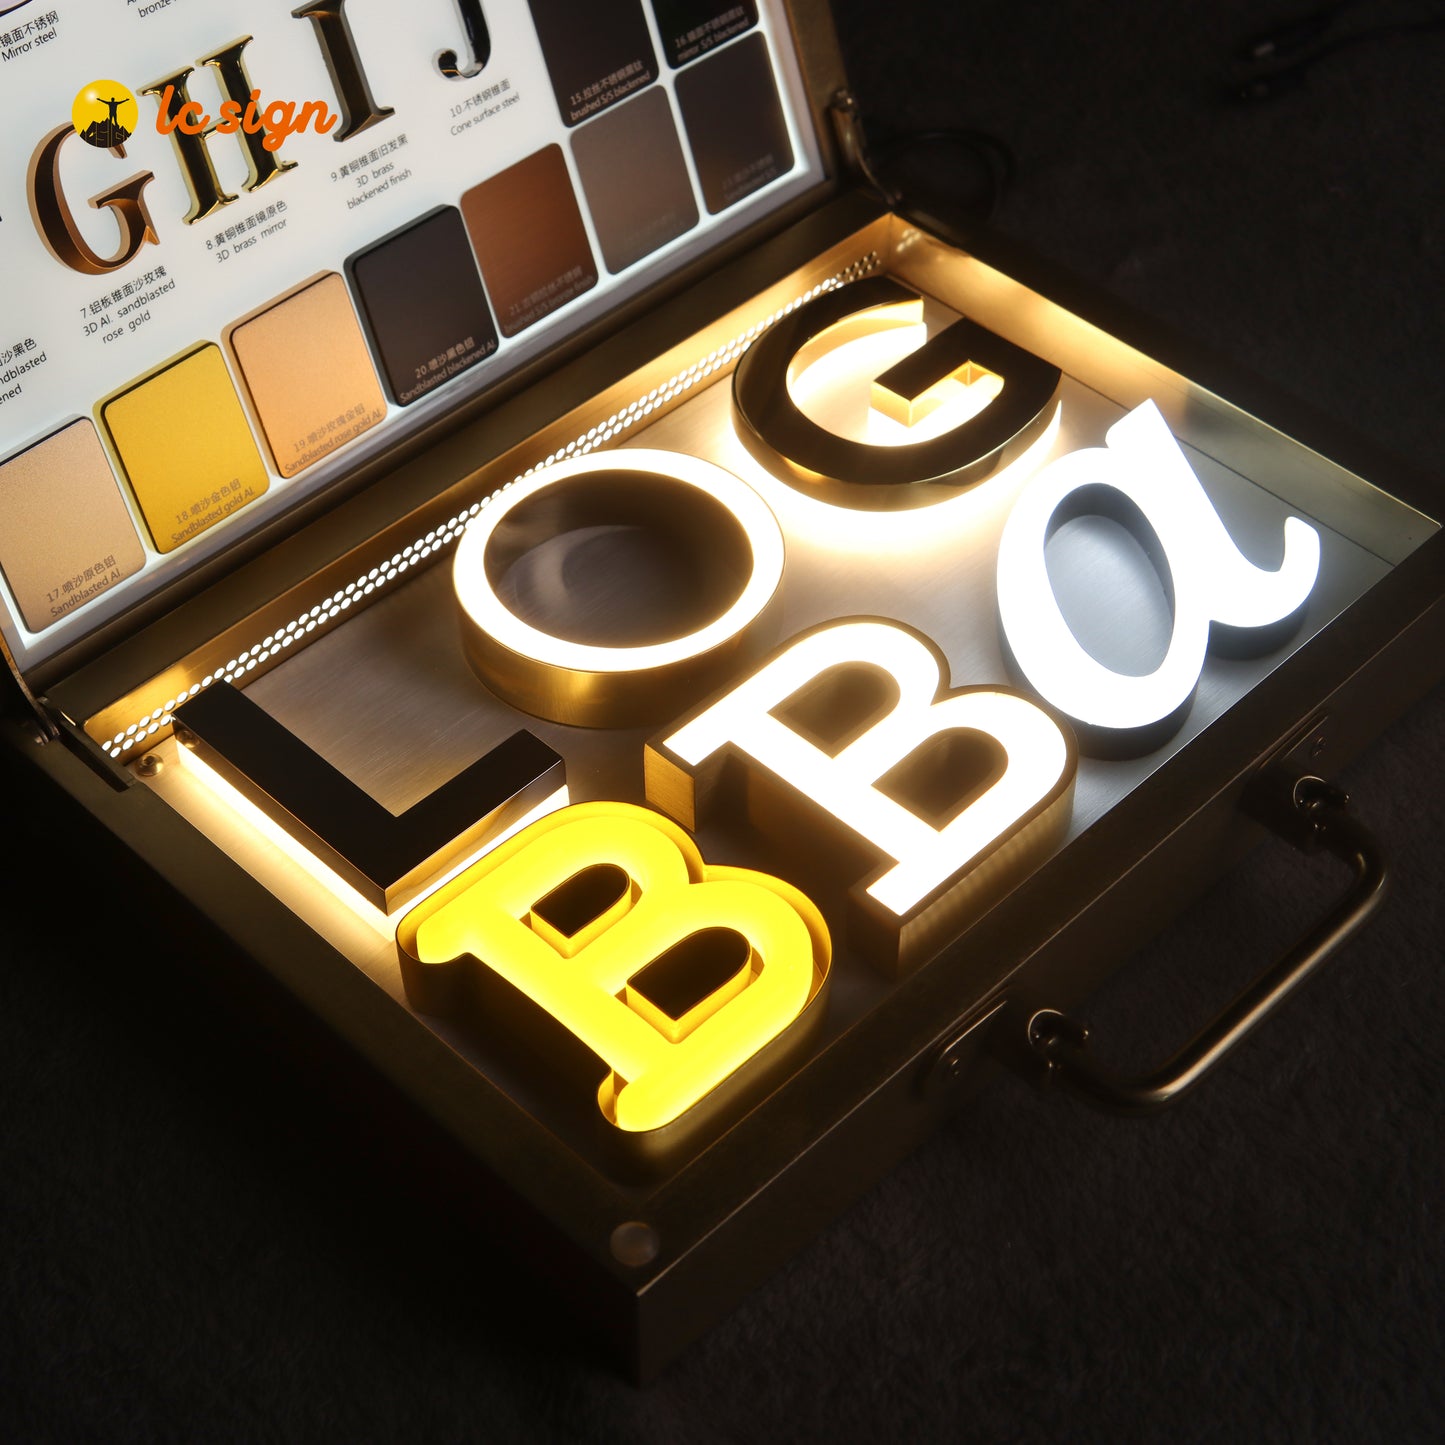 Luxury Sample Kit of 3D Letter Signs & Metal Treatment Samples